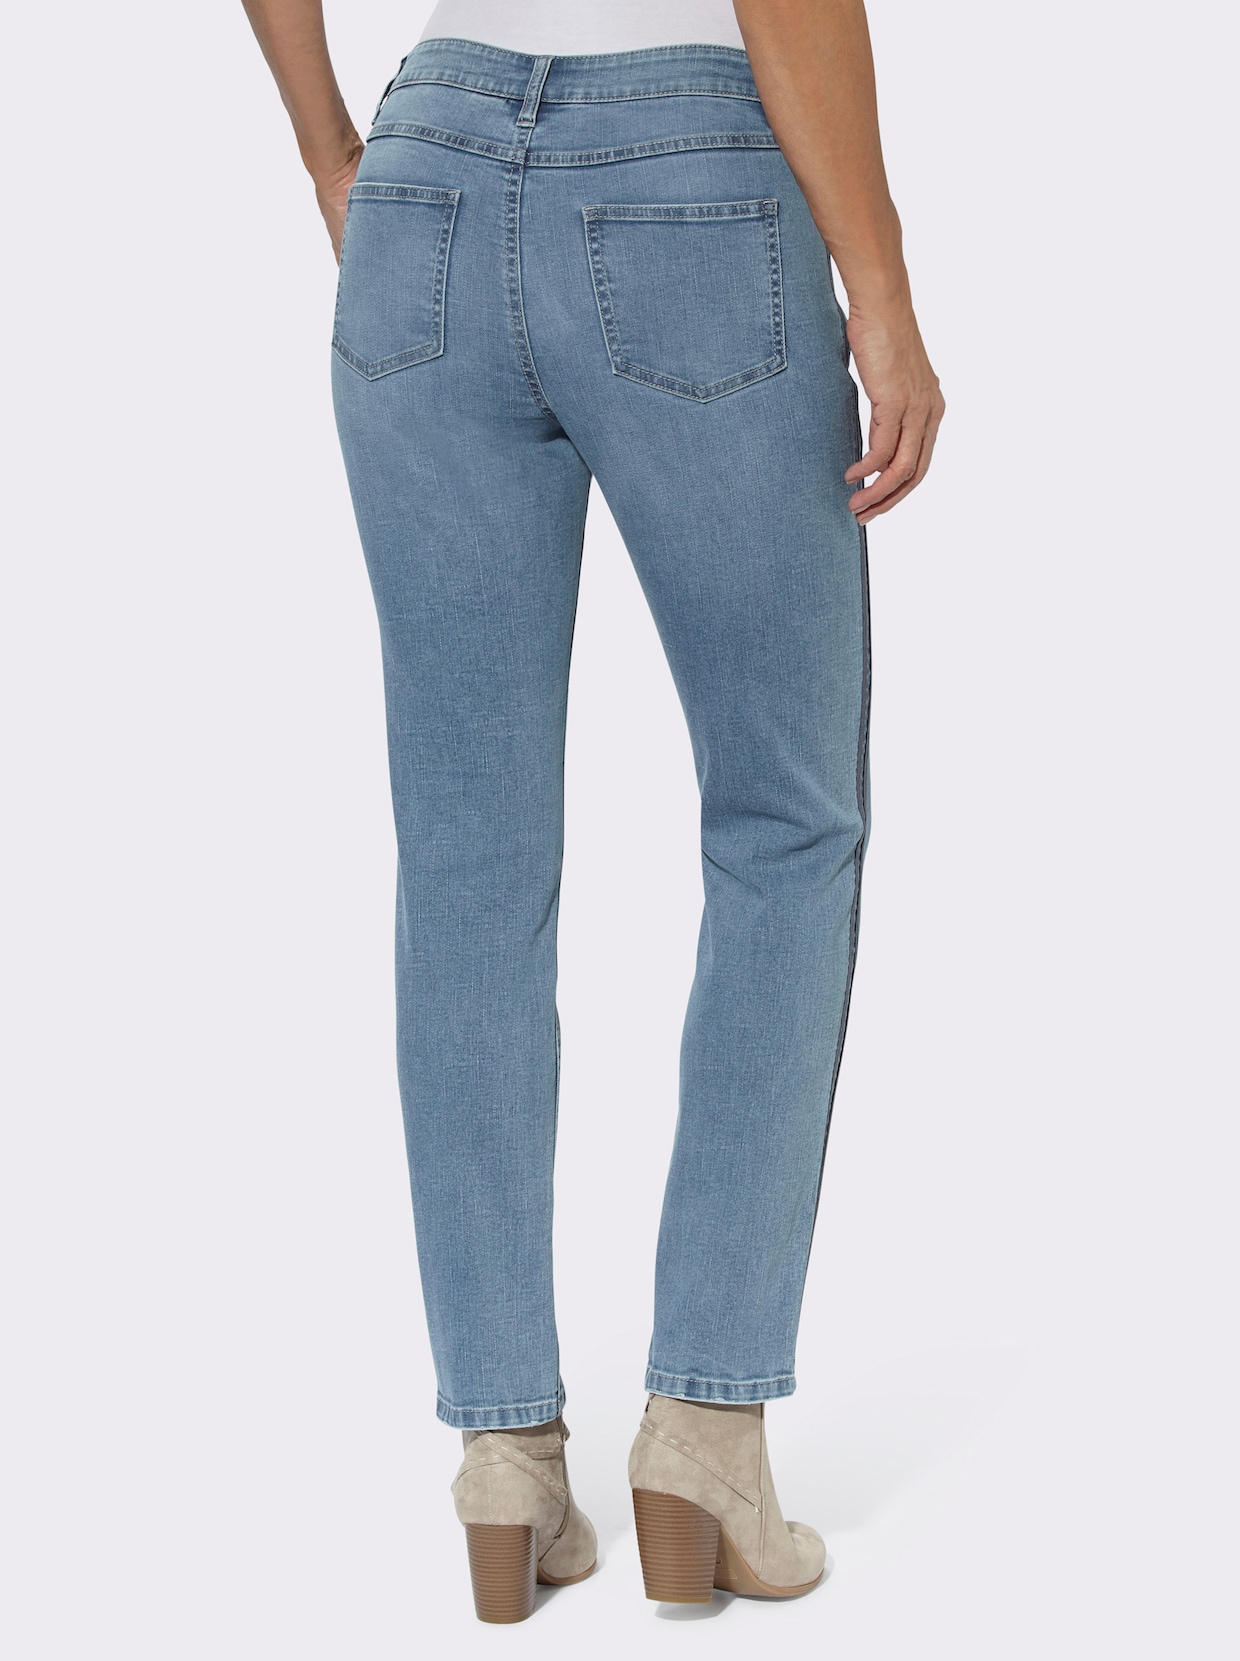 Jeans - blue-stone-washed